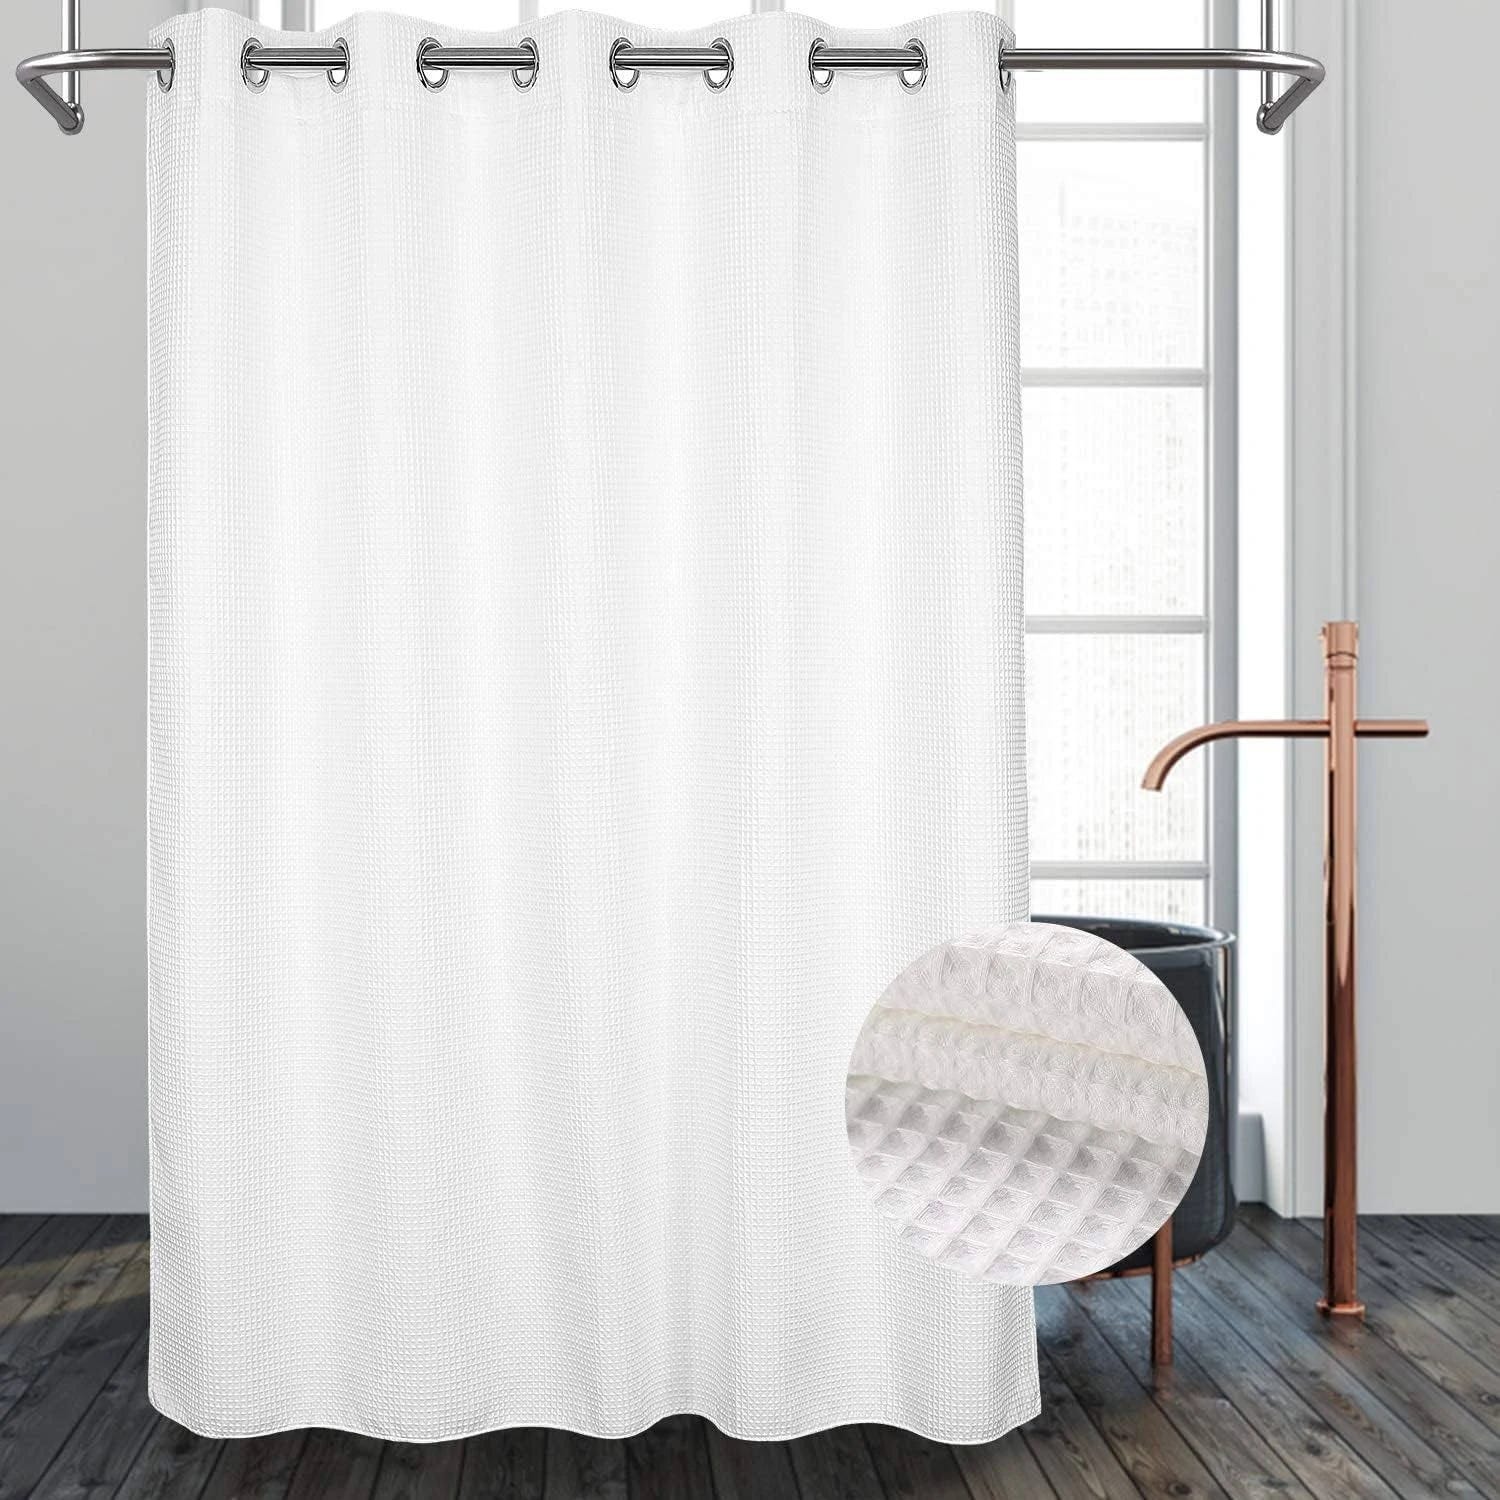 Elegant Hookless Shower Curtain with Snap-in Liner | Image